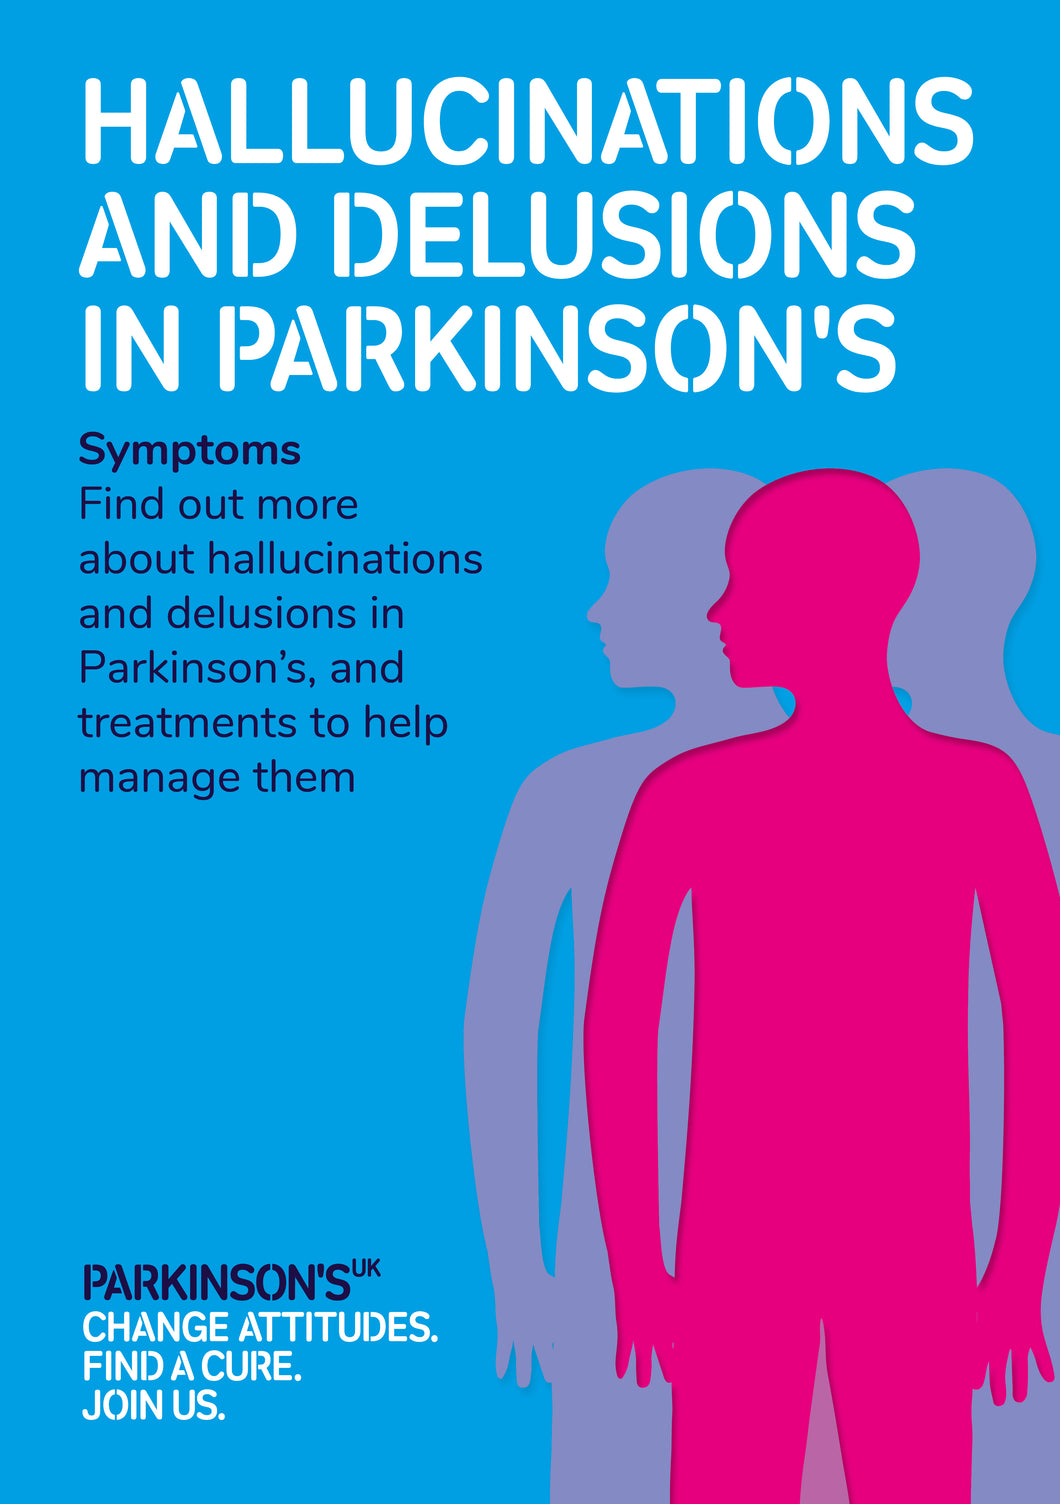 Hallucinations and delusions in Parkinson’s